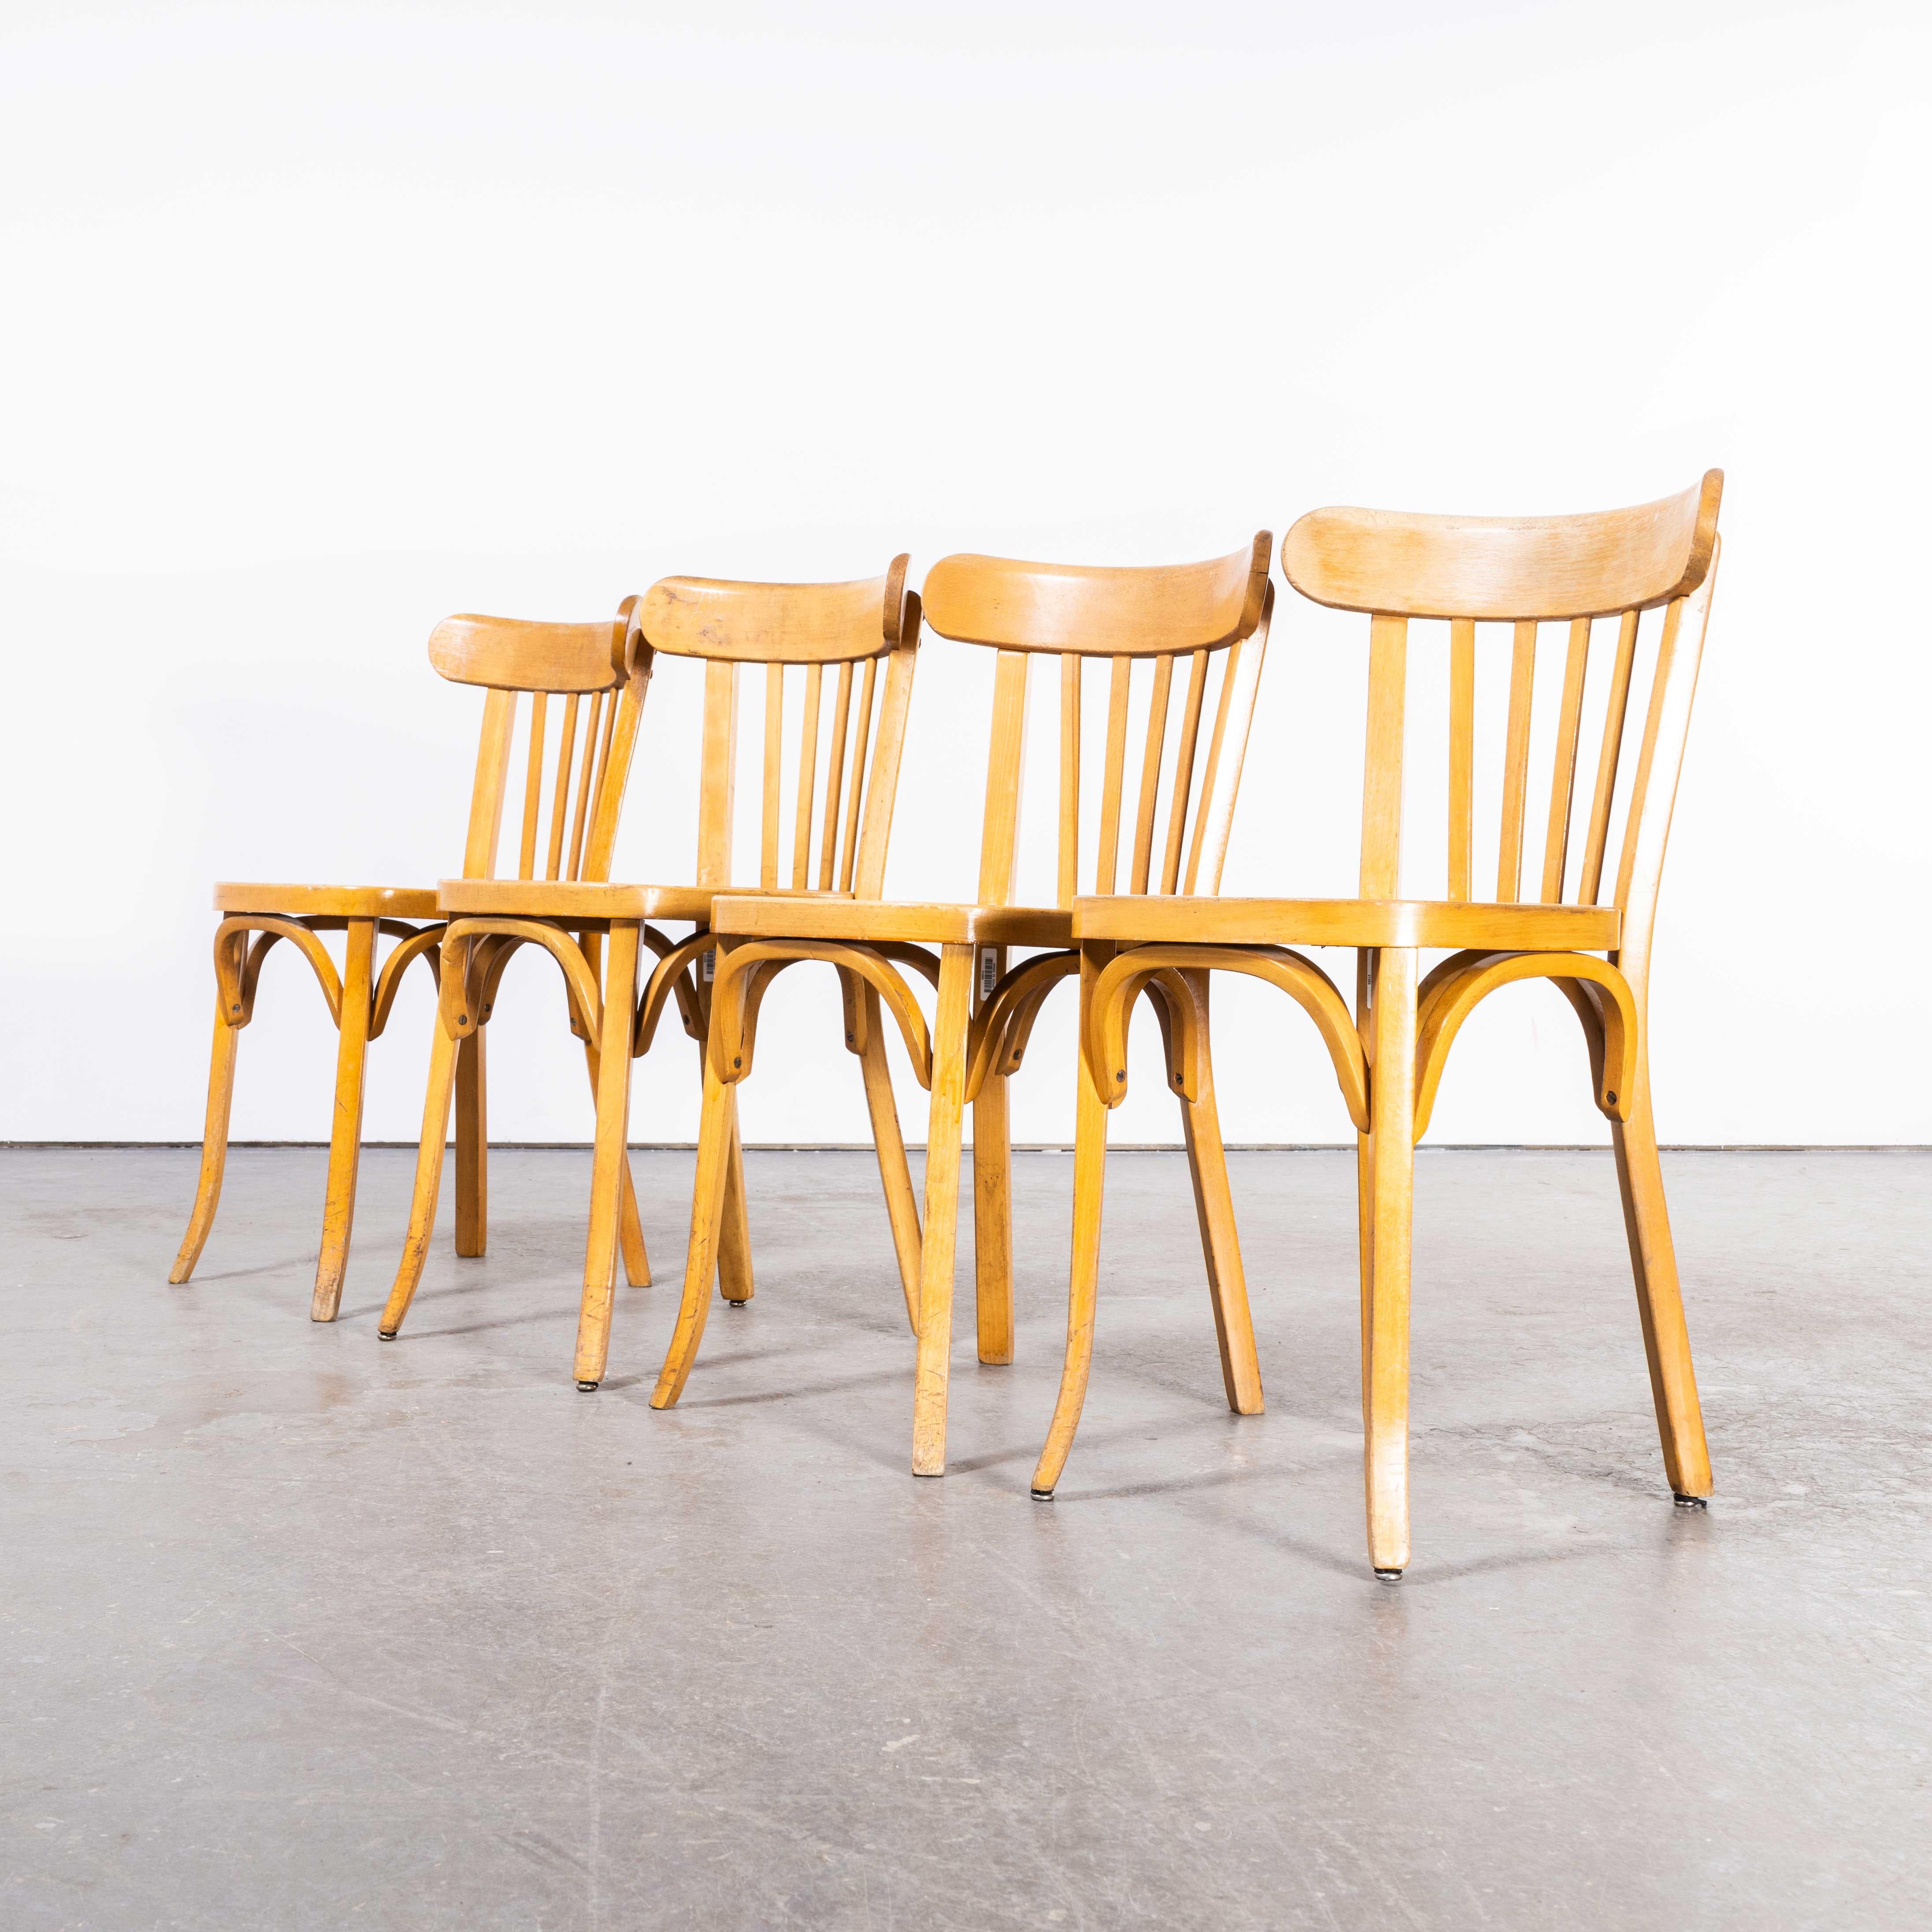 1970’s French Baumann blonde beech bentwood dining chairs – set of four
1970’s French Baumann blonde beech bentwood dining chairs – set of four. Baumann is a slightly off the radar French producer just starting to gain traction in the market.